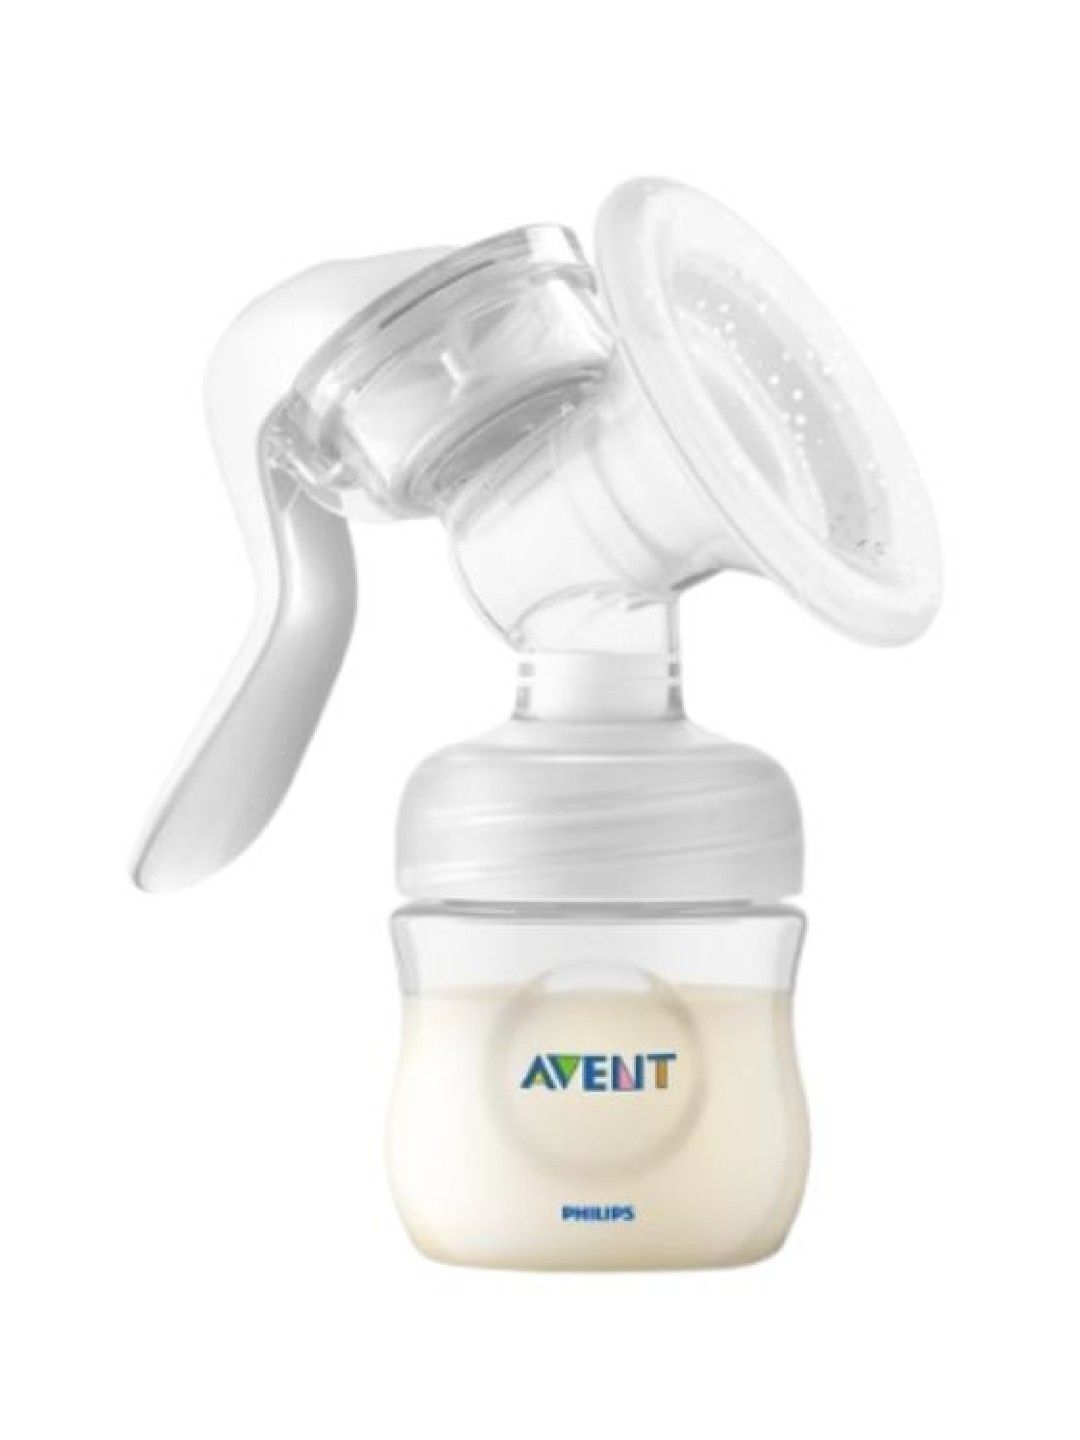 Avent Philips AVENT Manual Breast Pump with Bottle